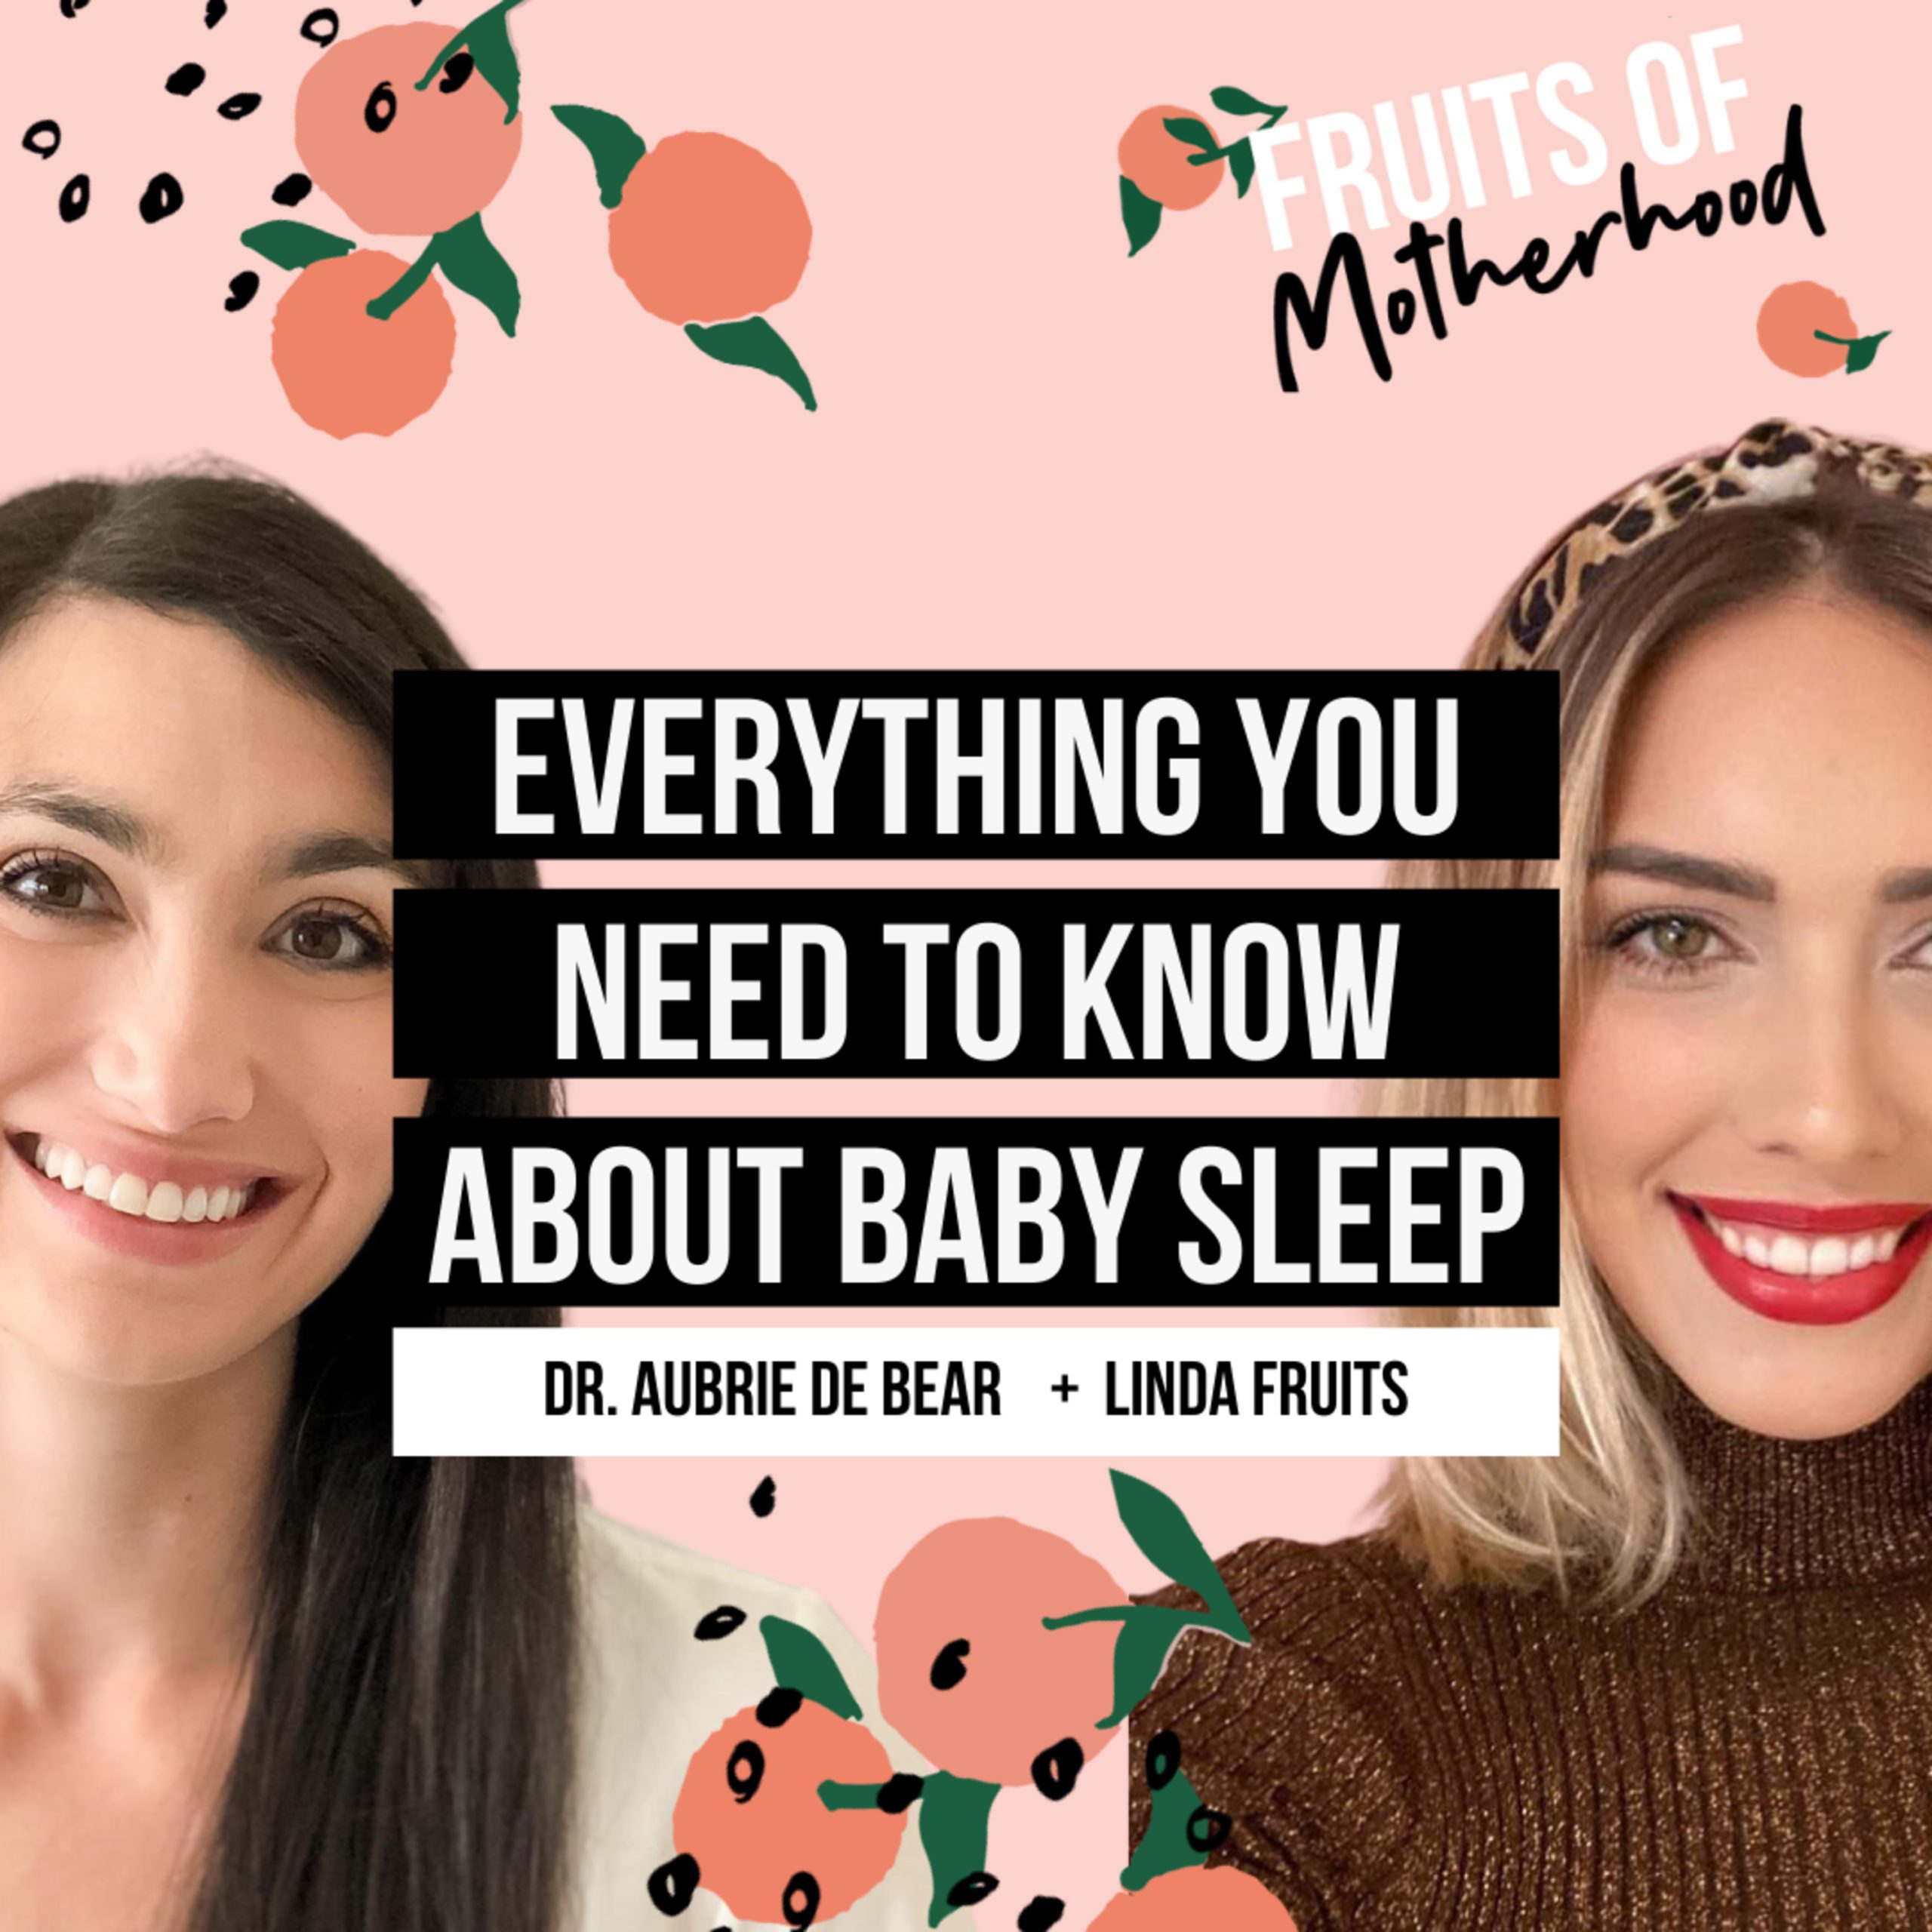 Everything you need to know about baby sleep